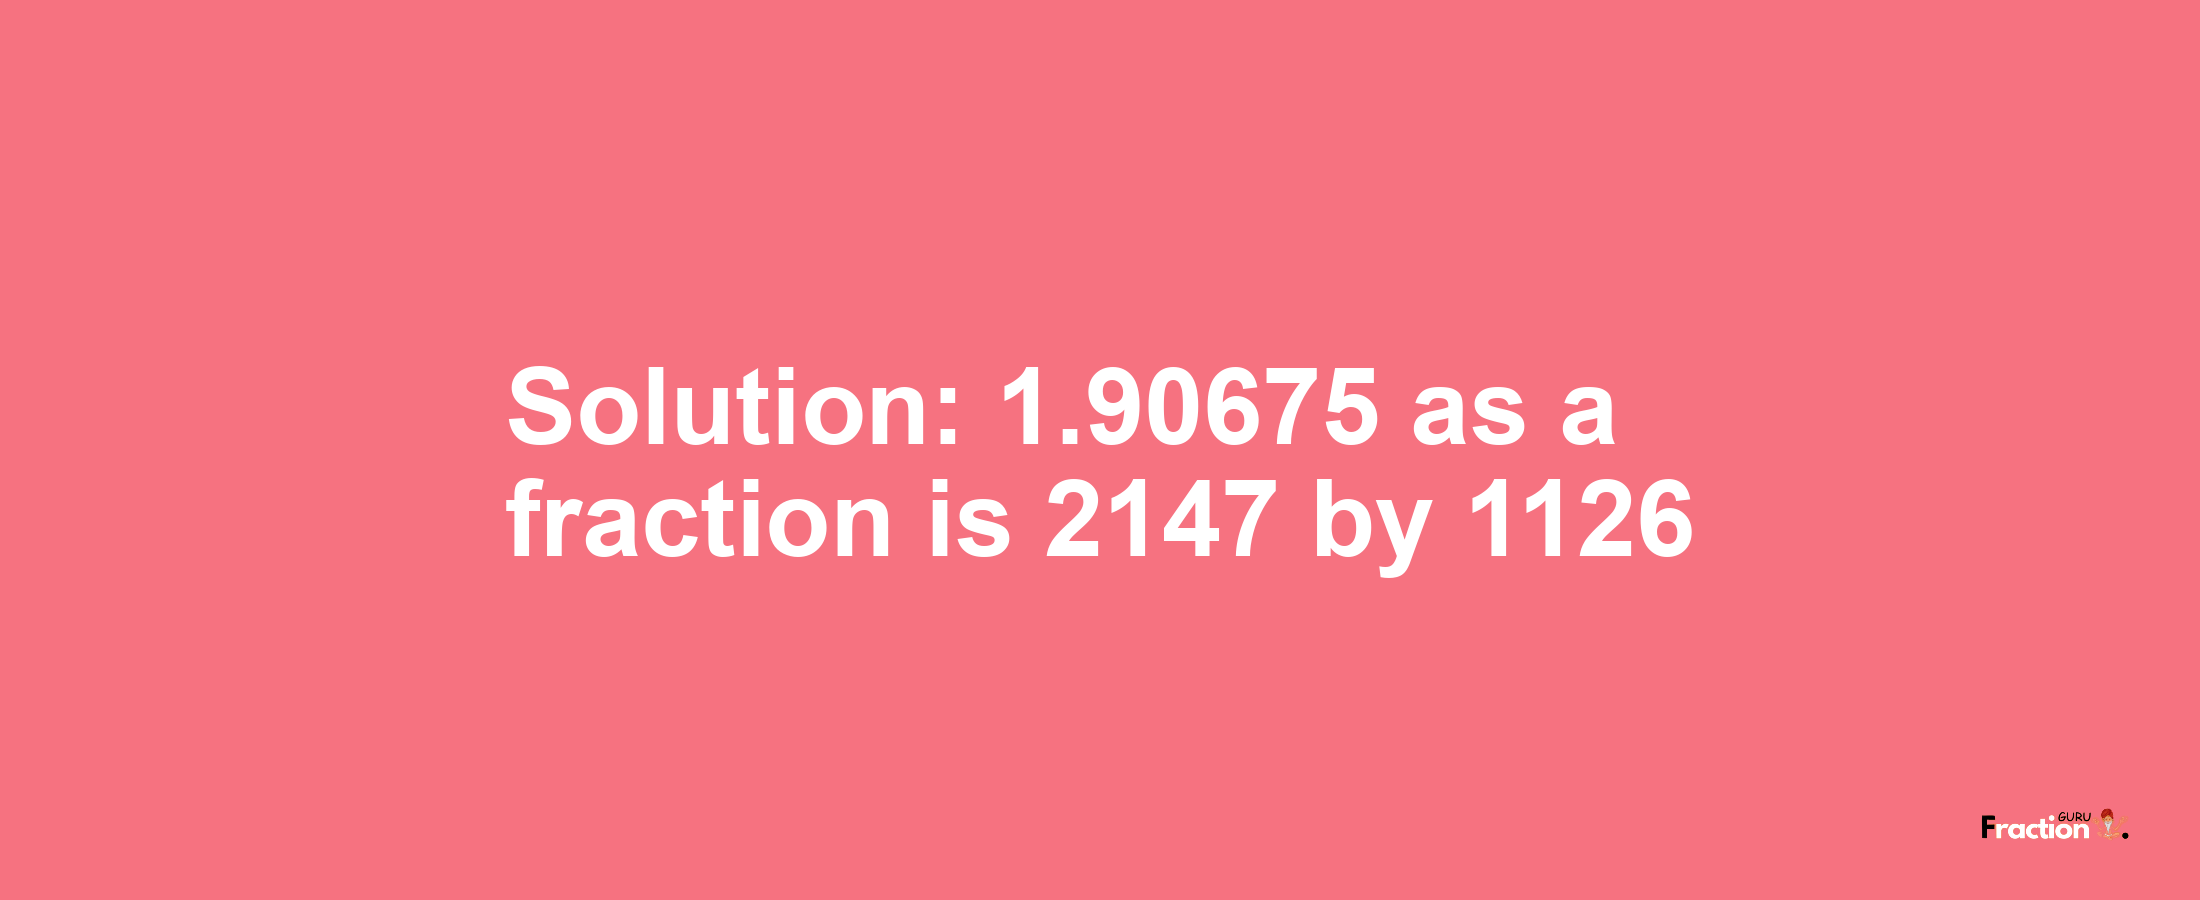 Solution:1.90675 as a fraction is 2147/1126